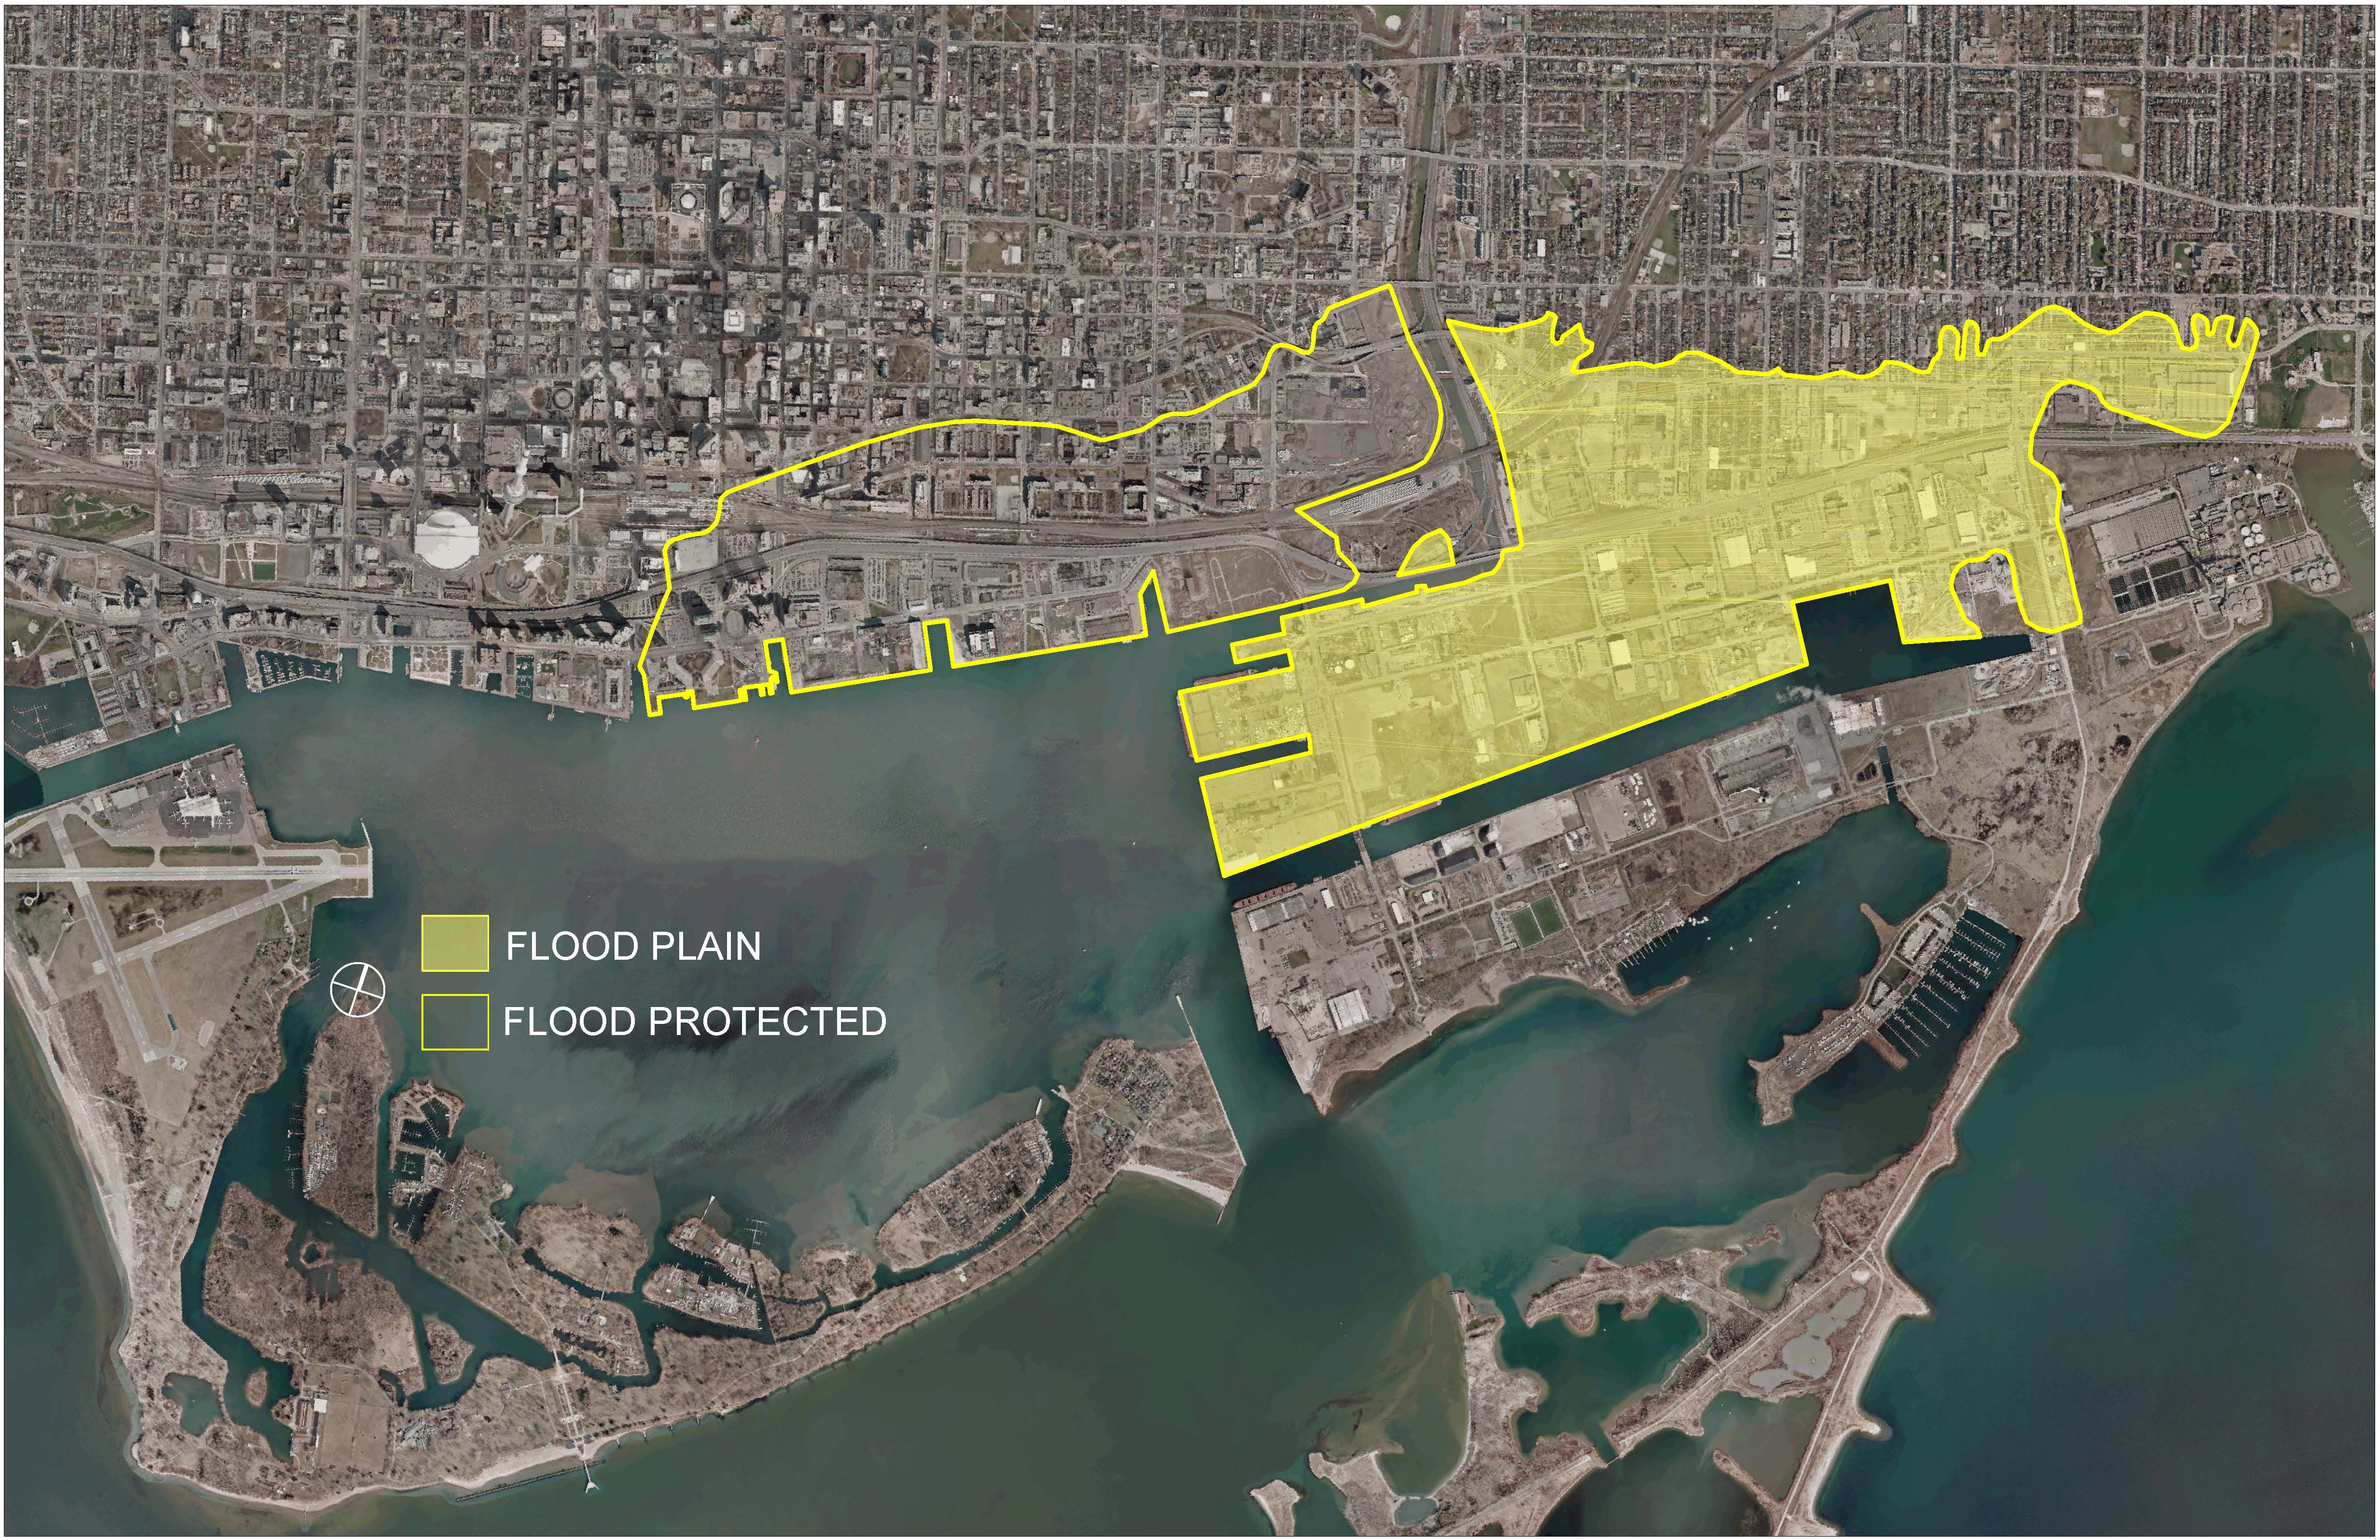 This map outlines the 500 acres of land that the FPL currently protects. It also shows future flood protection areas, including the Port Lands and adjacent areas that are currently not flood protected.